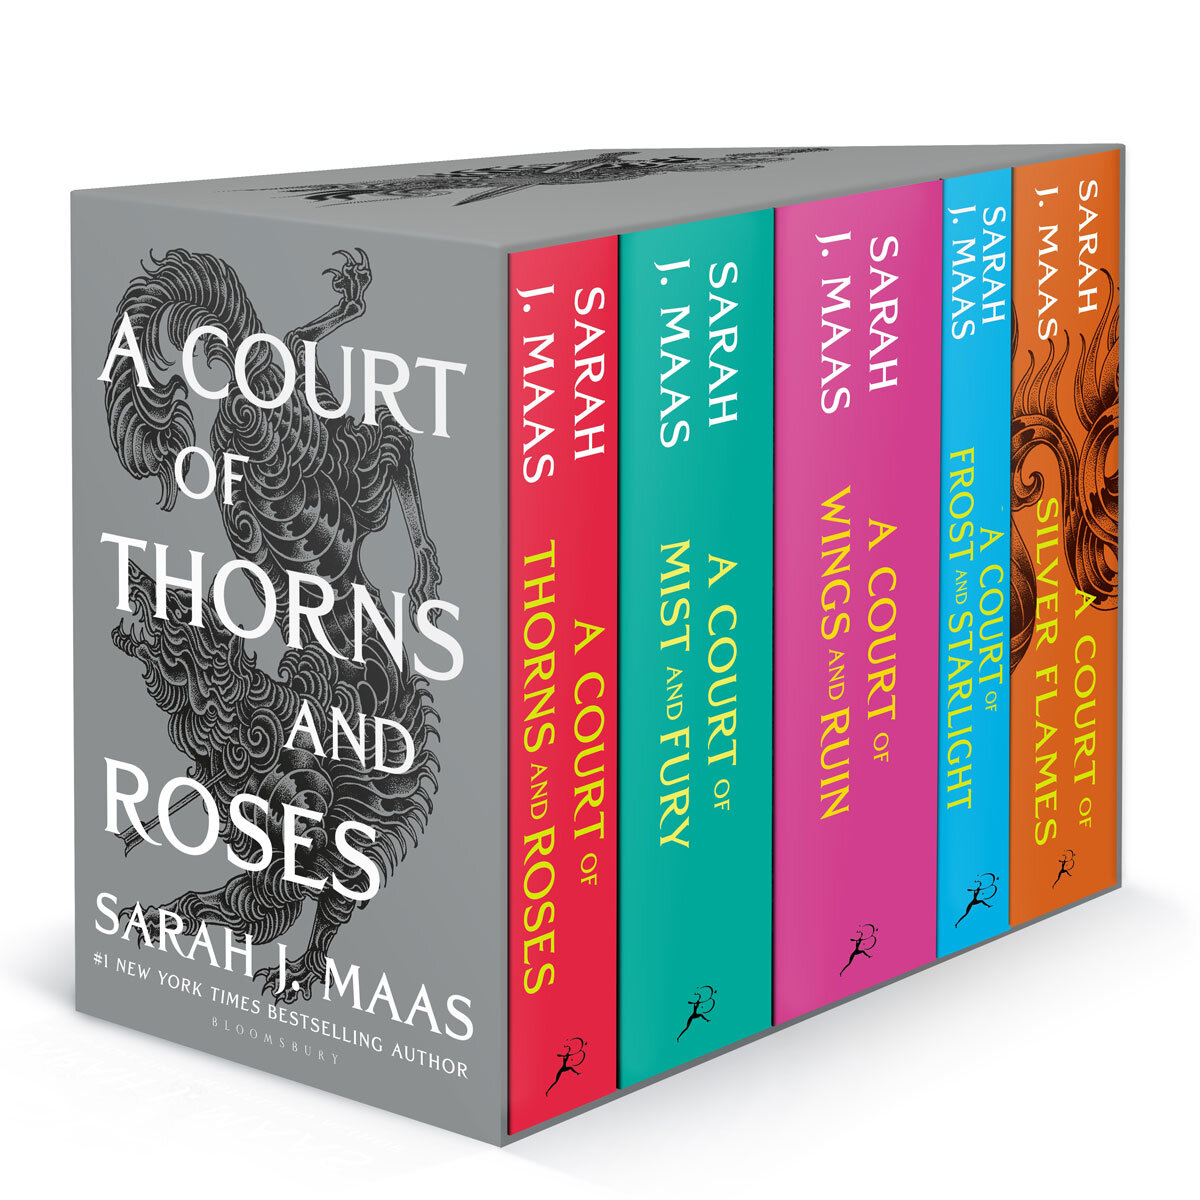 Boxset　Sarah　by　Maas　of　and　J　Court　Roses　Thorns　A　Collection